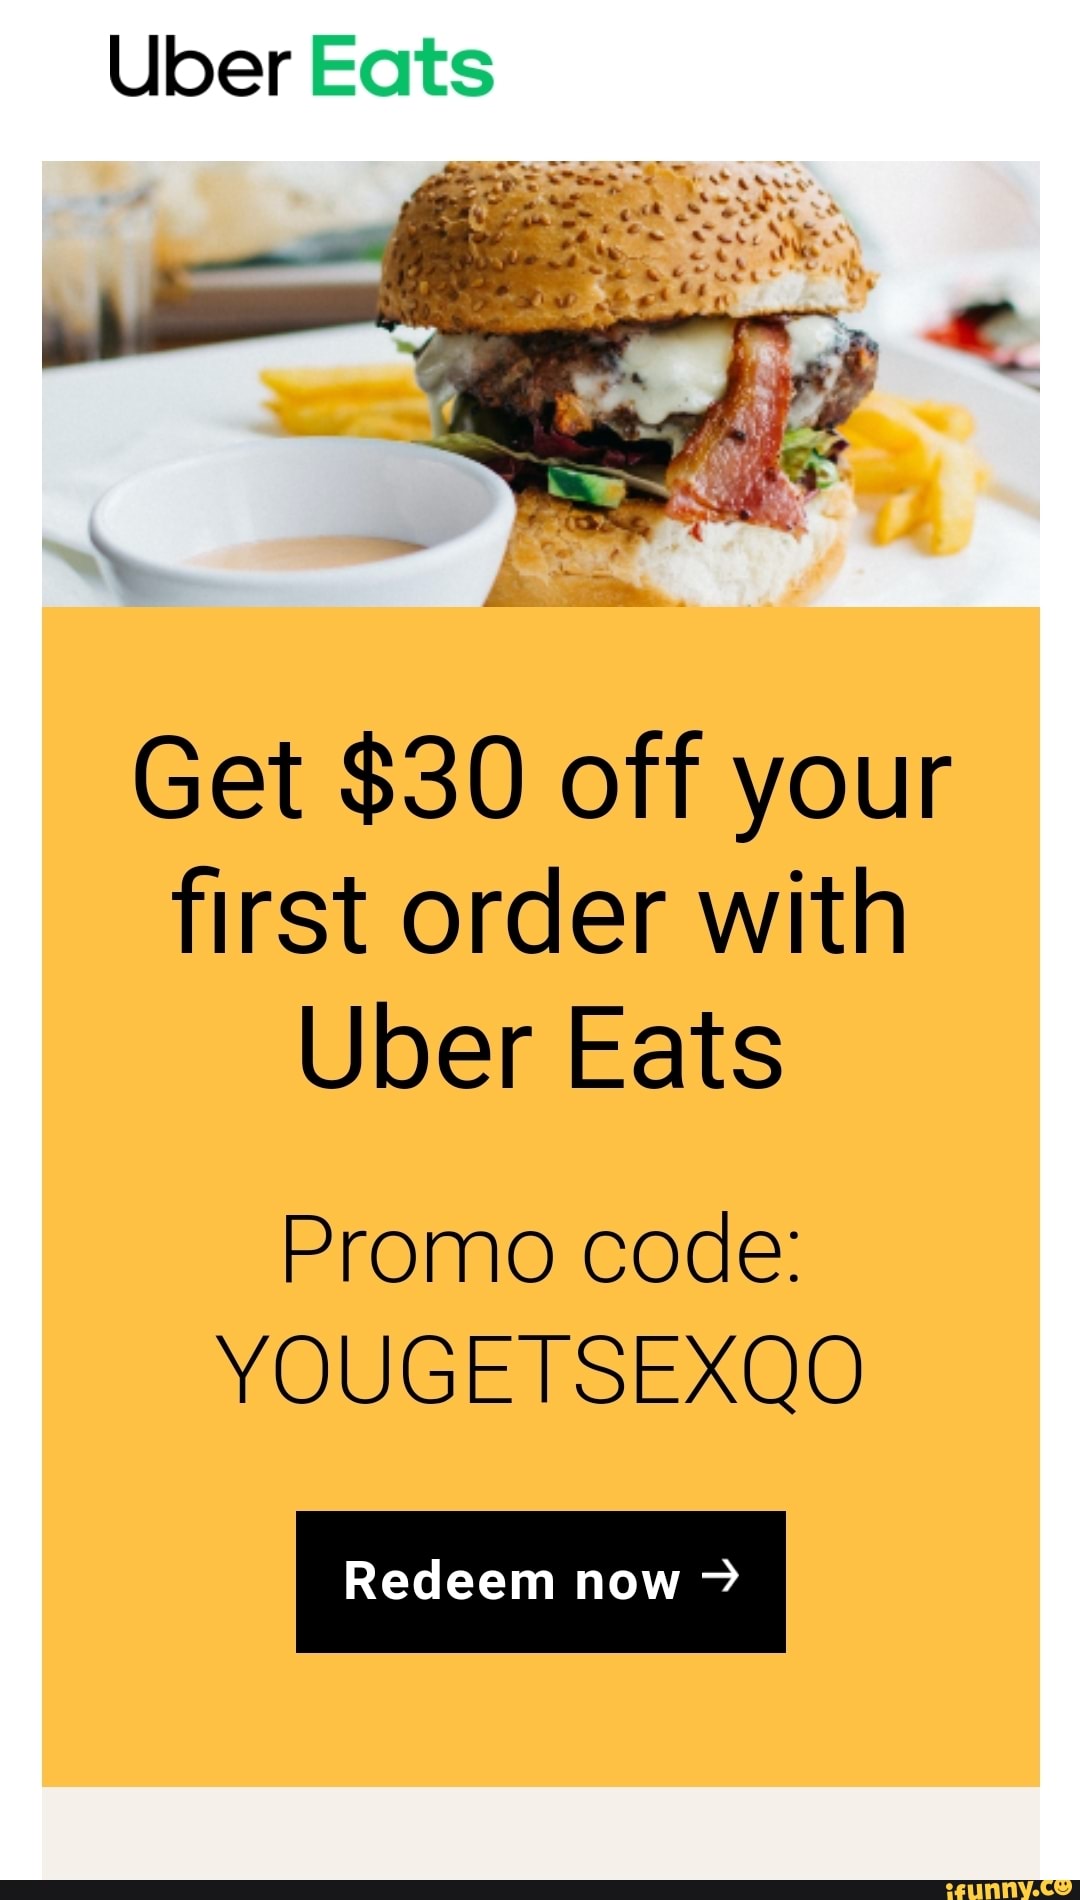 Eats Brazil first your Redeem Promo order off iFunny Uloer lecres with $30 ~ - code: Uber YOUGETSEXQO Get now